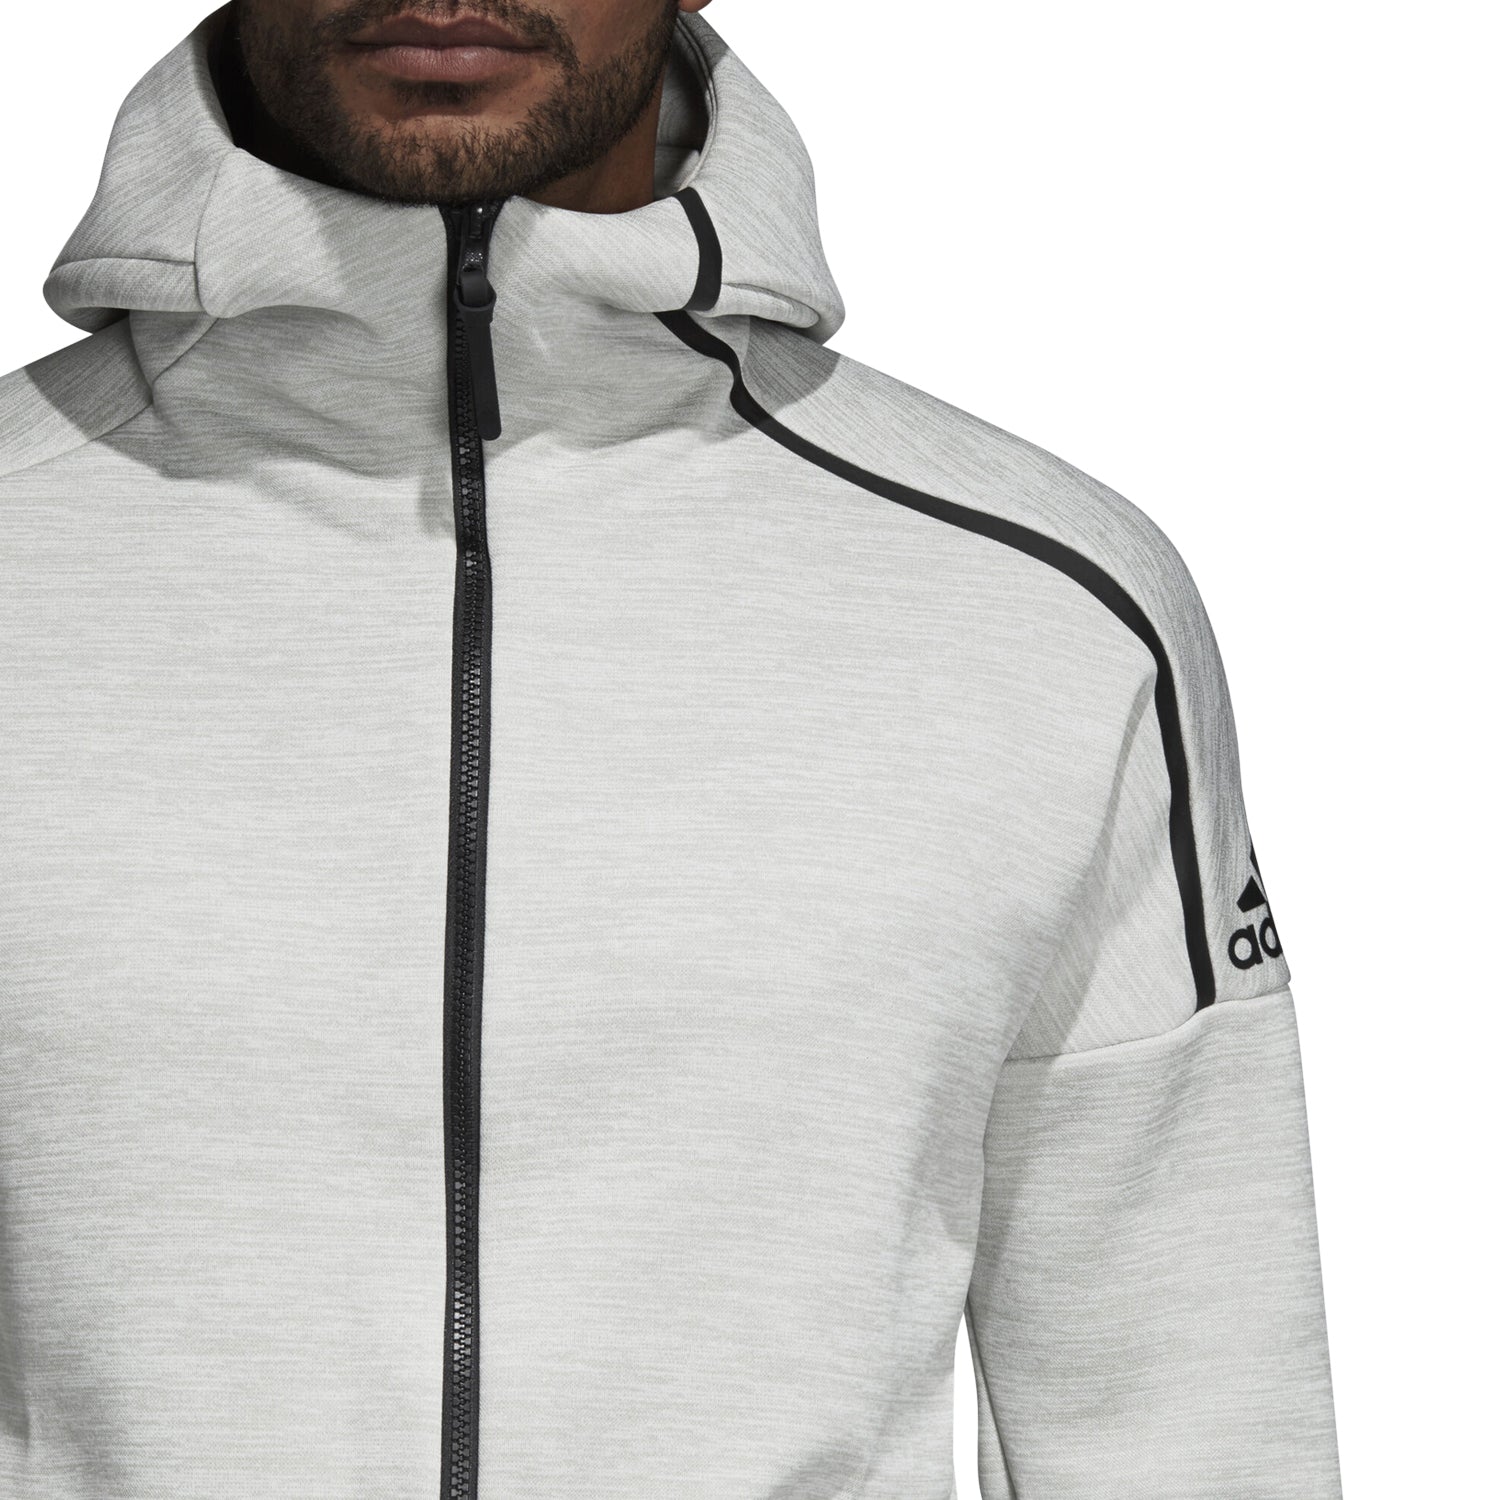 adidas zne fast release hoody